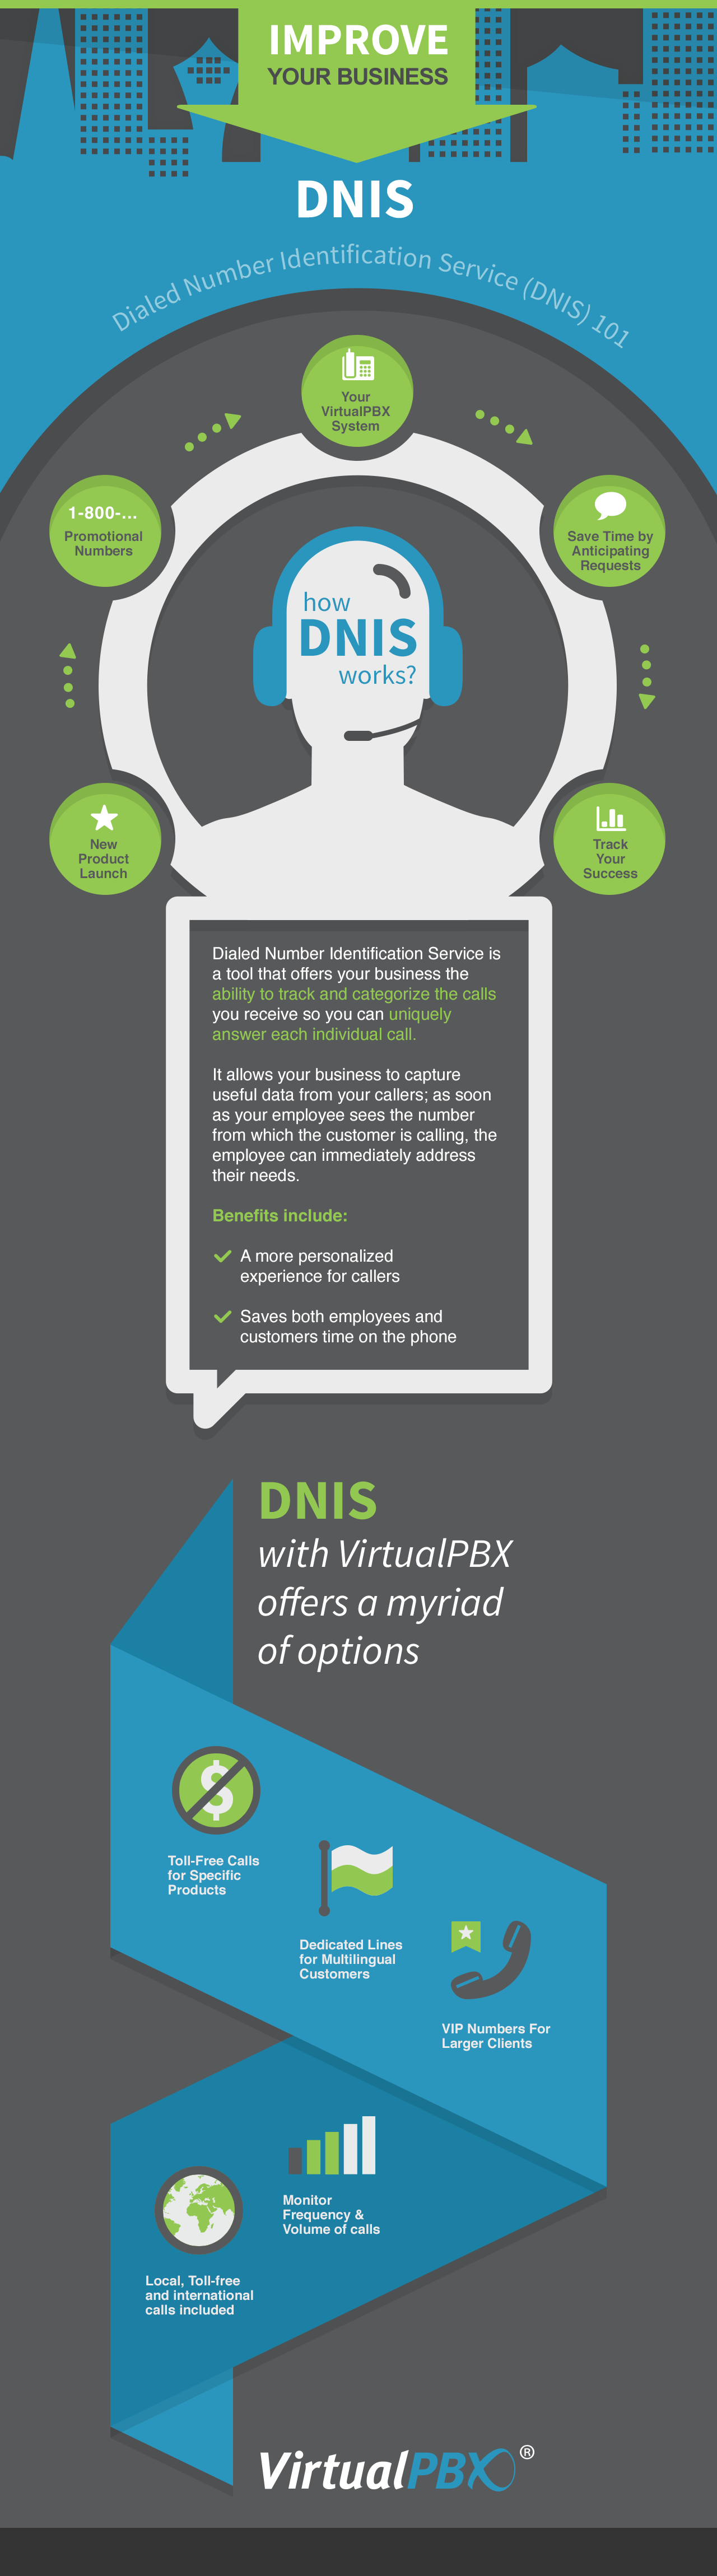 DNIS Explained